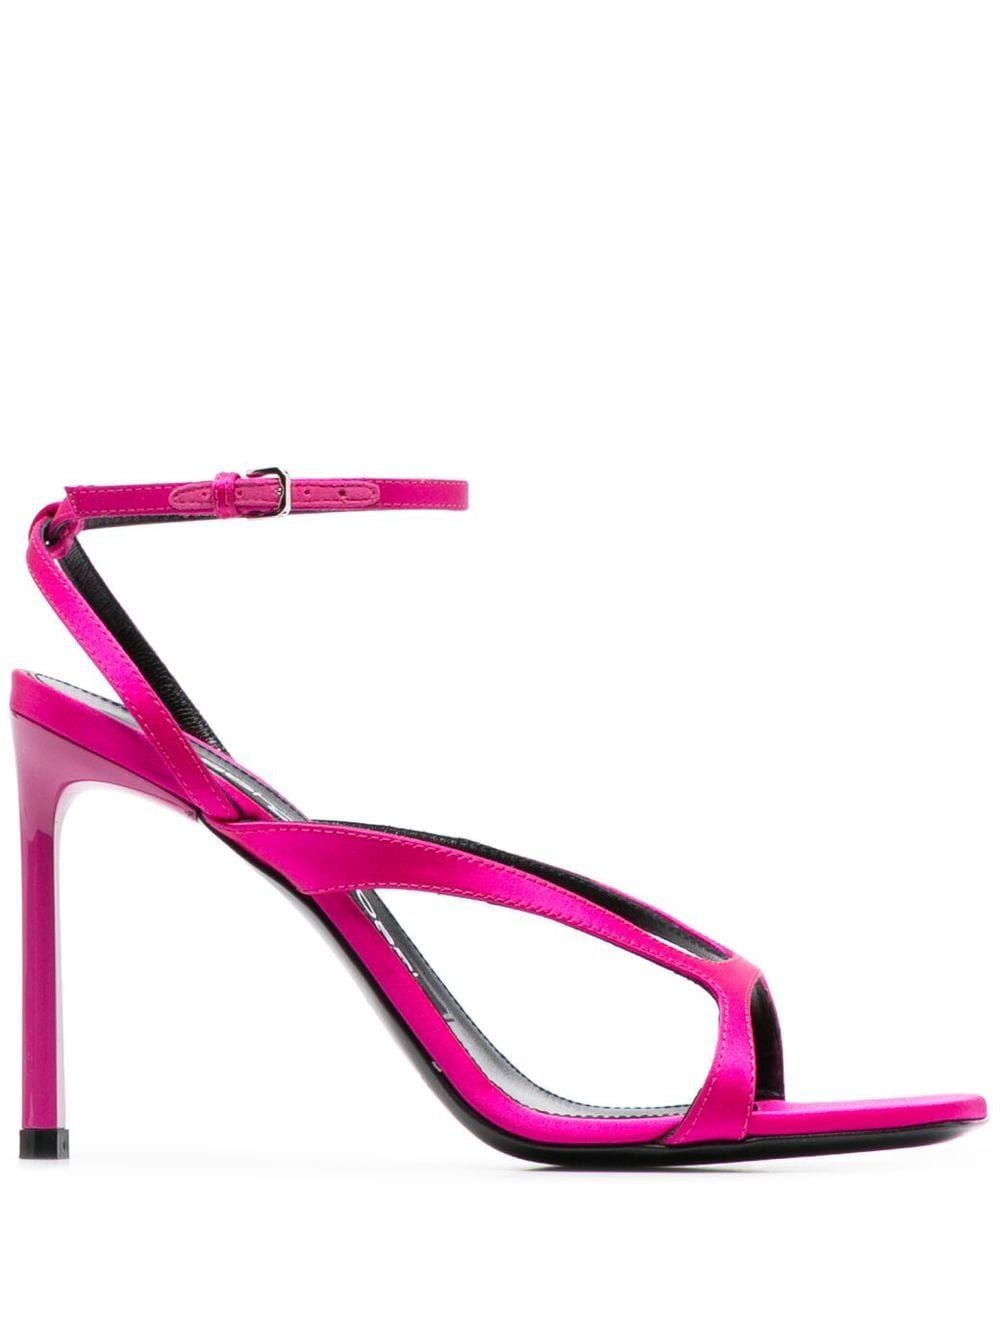 SERGIO ROSSI Pink & Purple 100mm Leather Sandals for Women - SS23 Collection